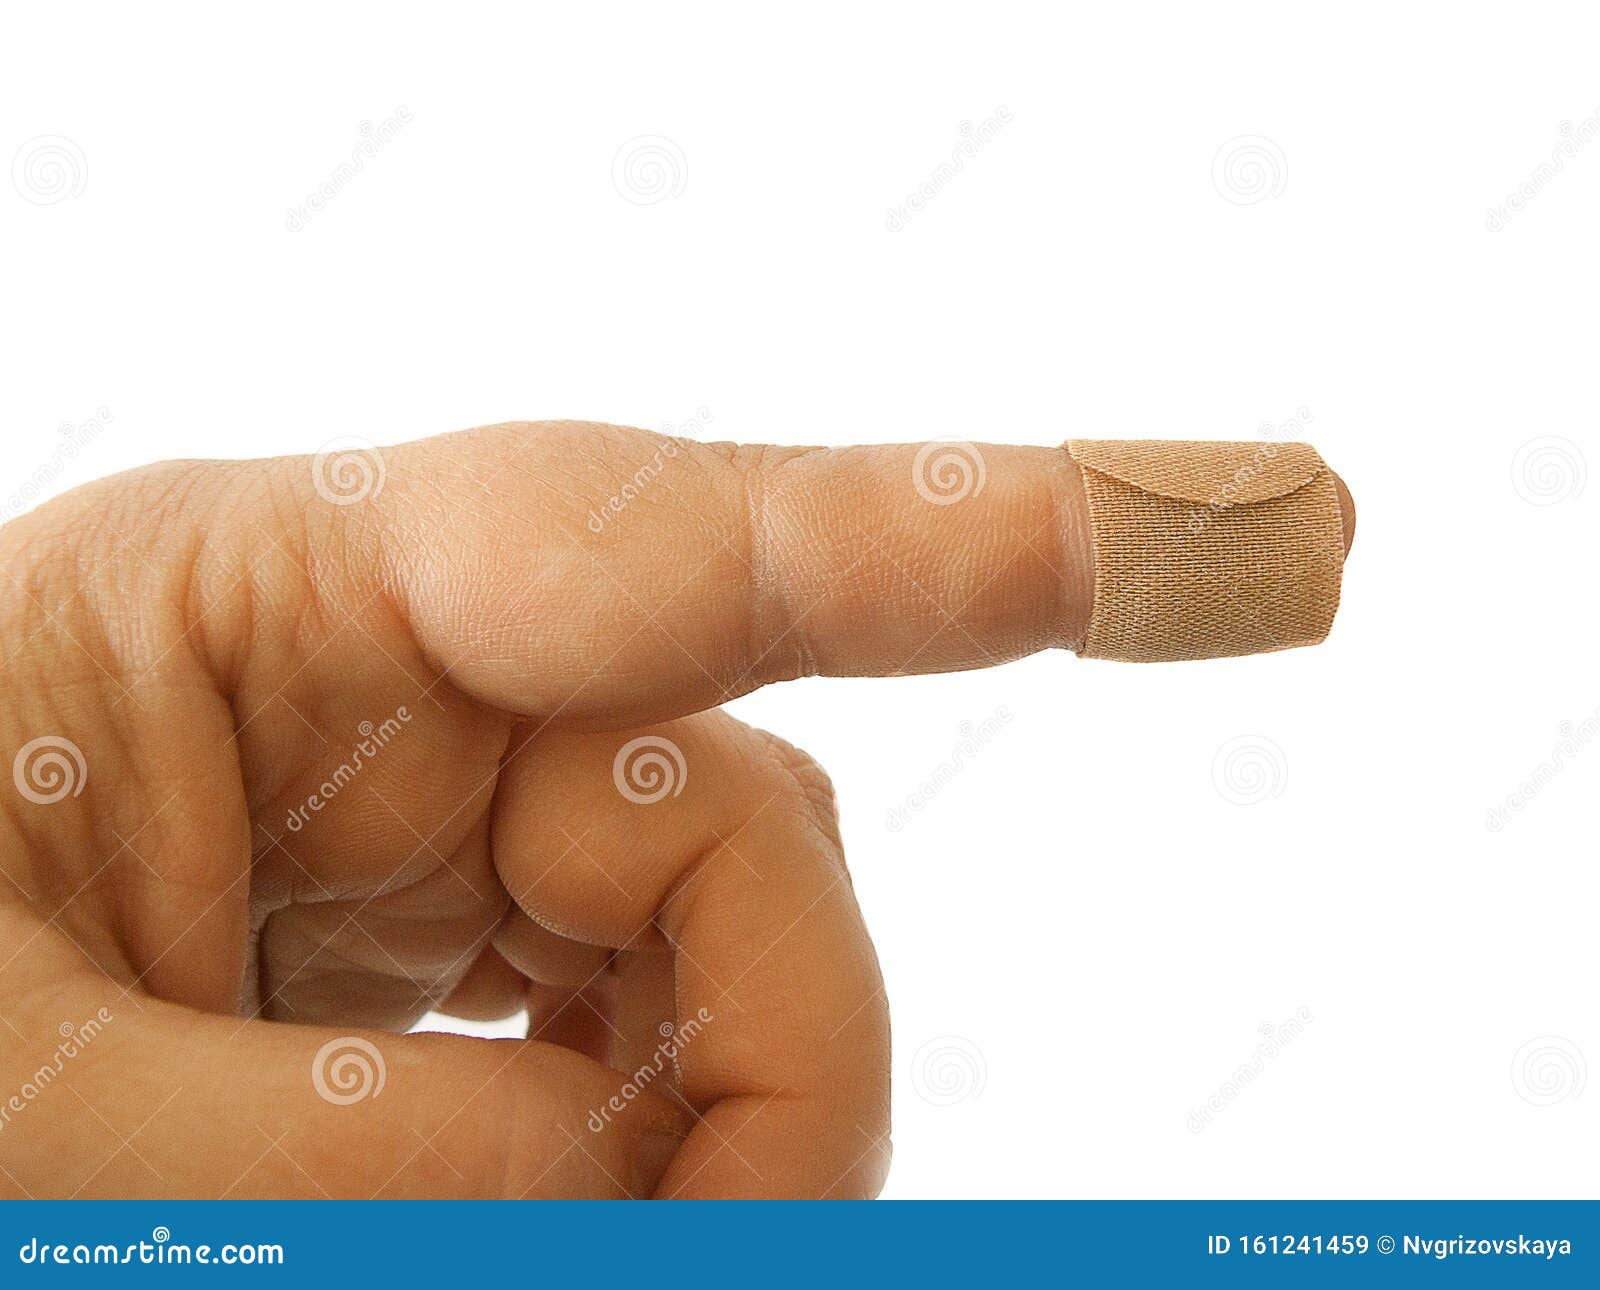 cut index finger glued with adhesive plaster. insulate